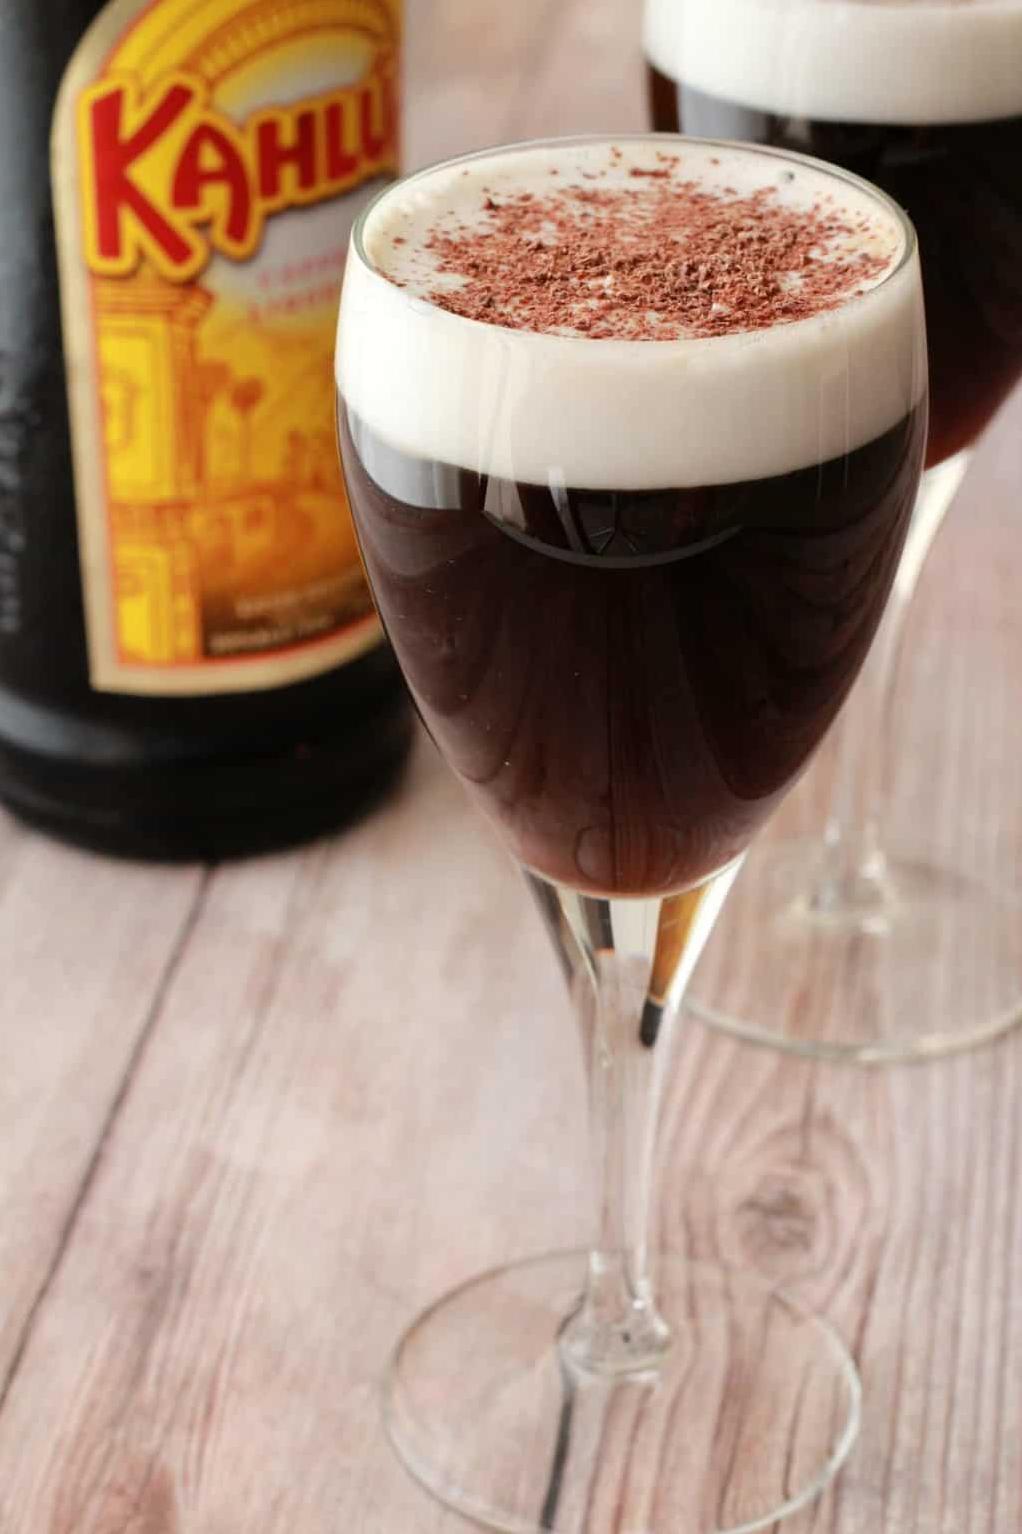  Wake up to a deliciously aromatic and rich Kahlua-infused coffee taste.